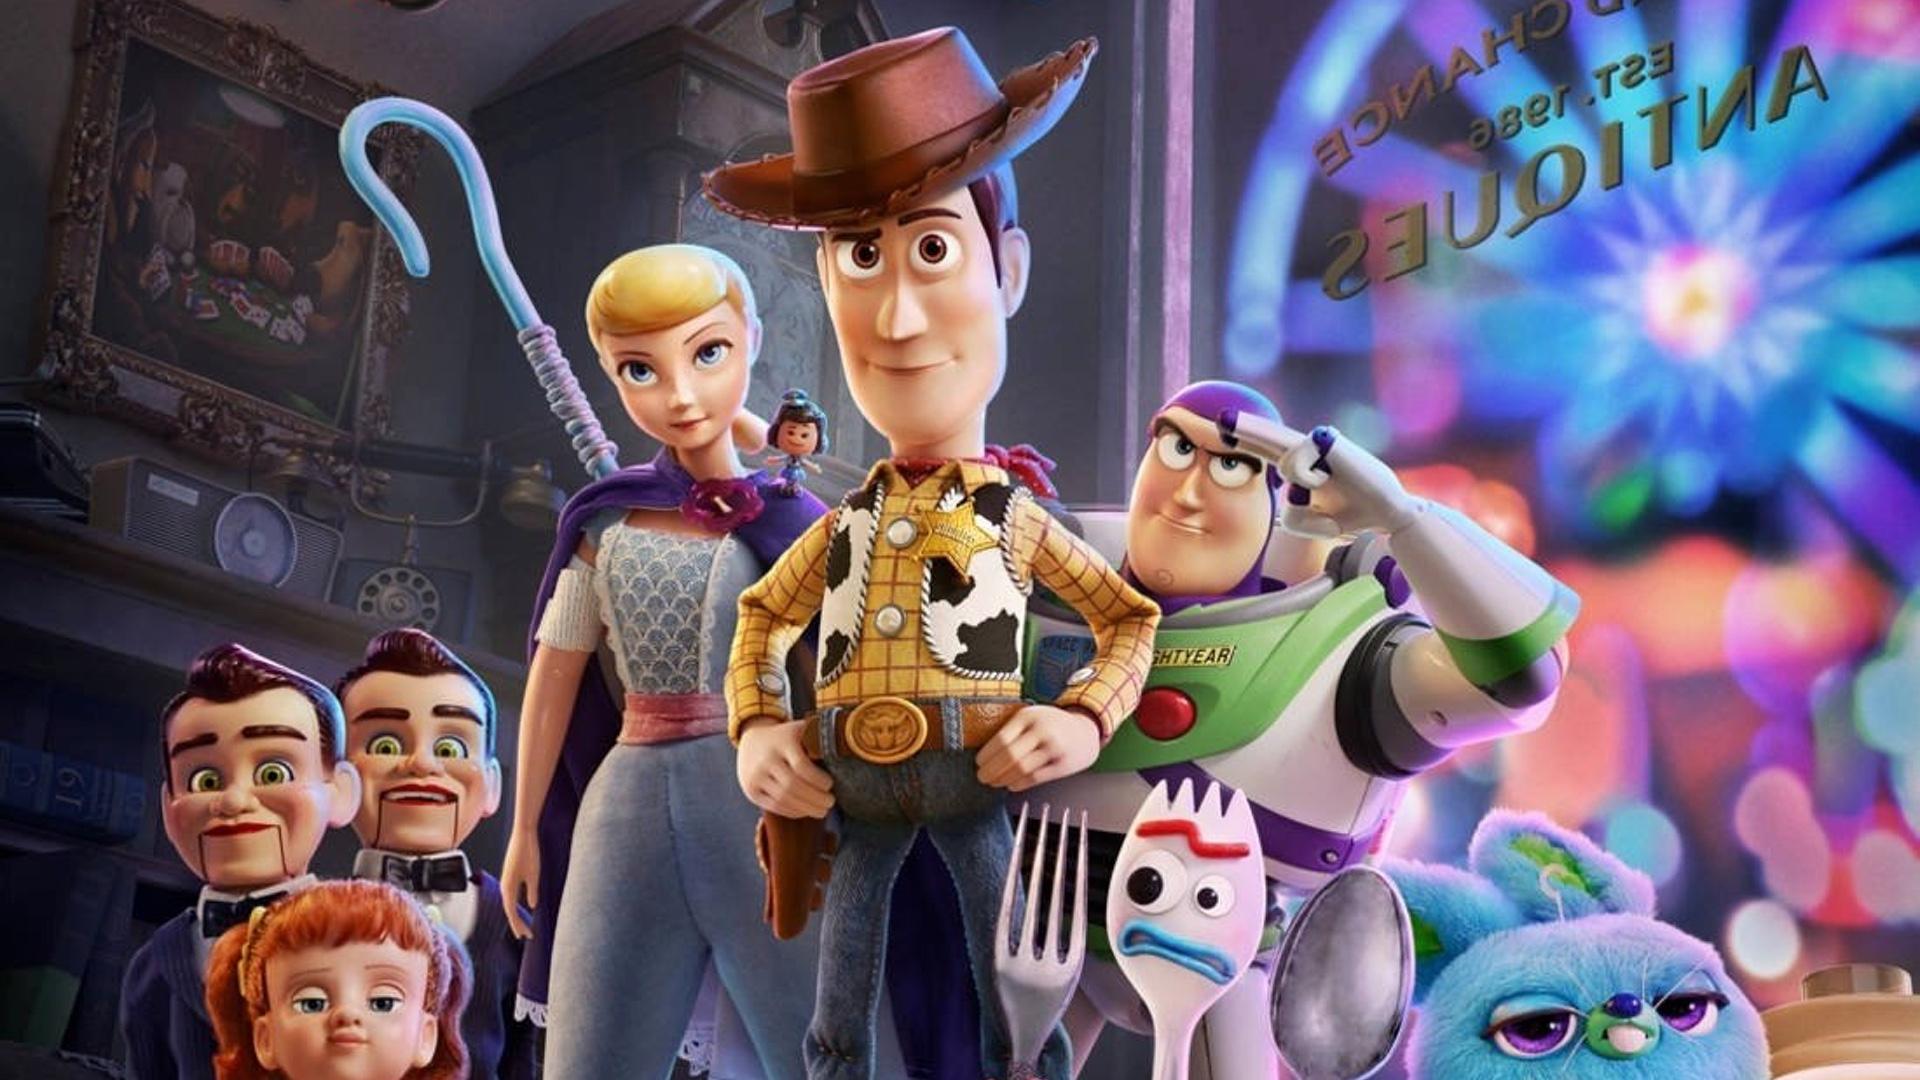 Wonderful Full Trailer and Poster for Pixar’s TOY STORY